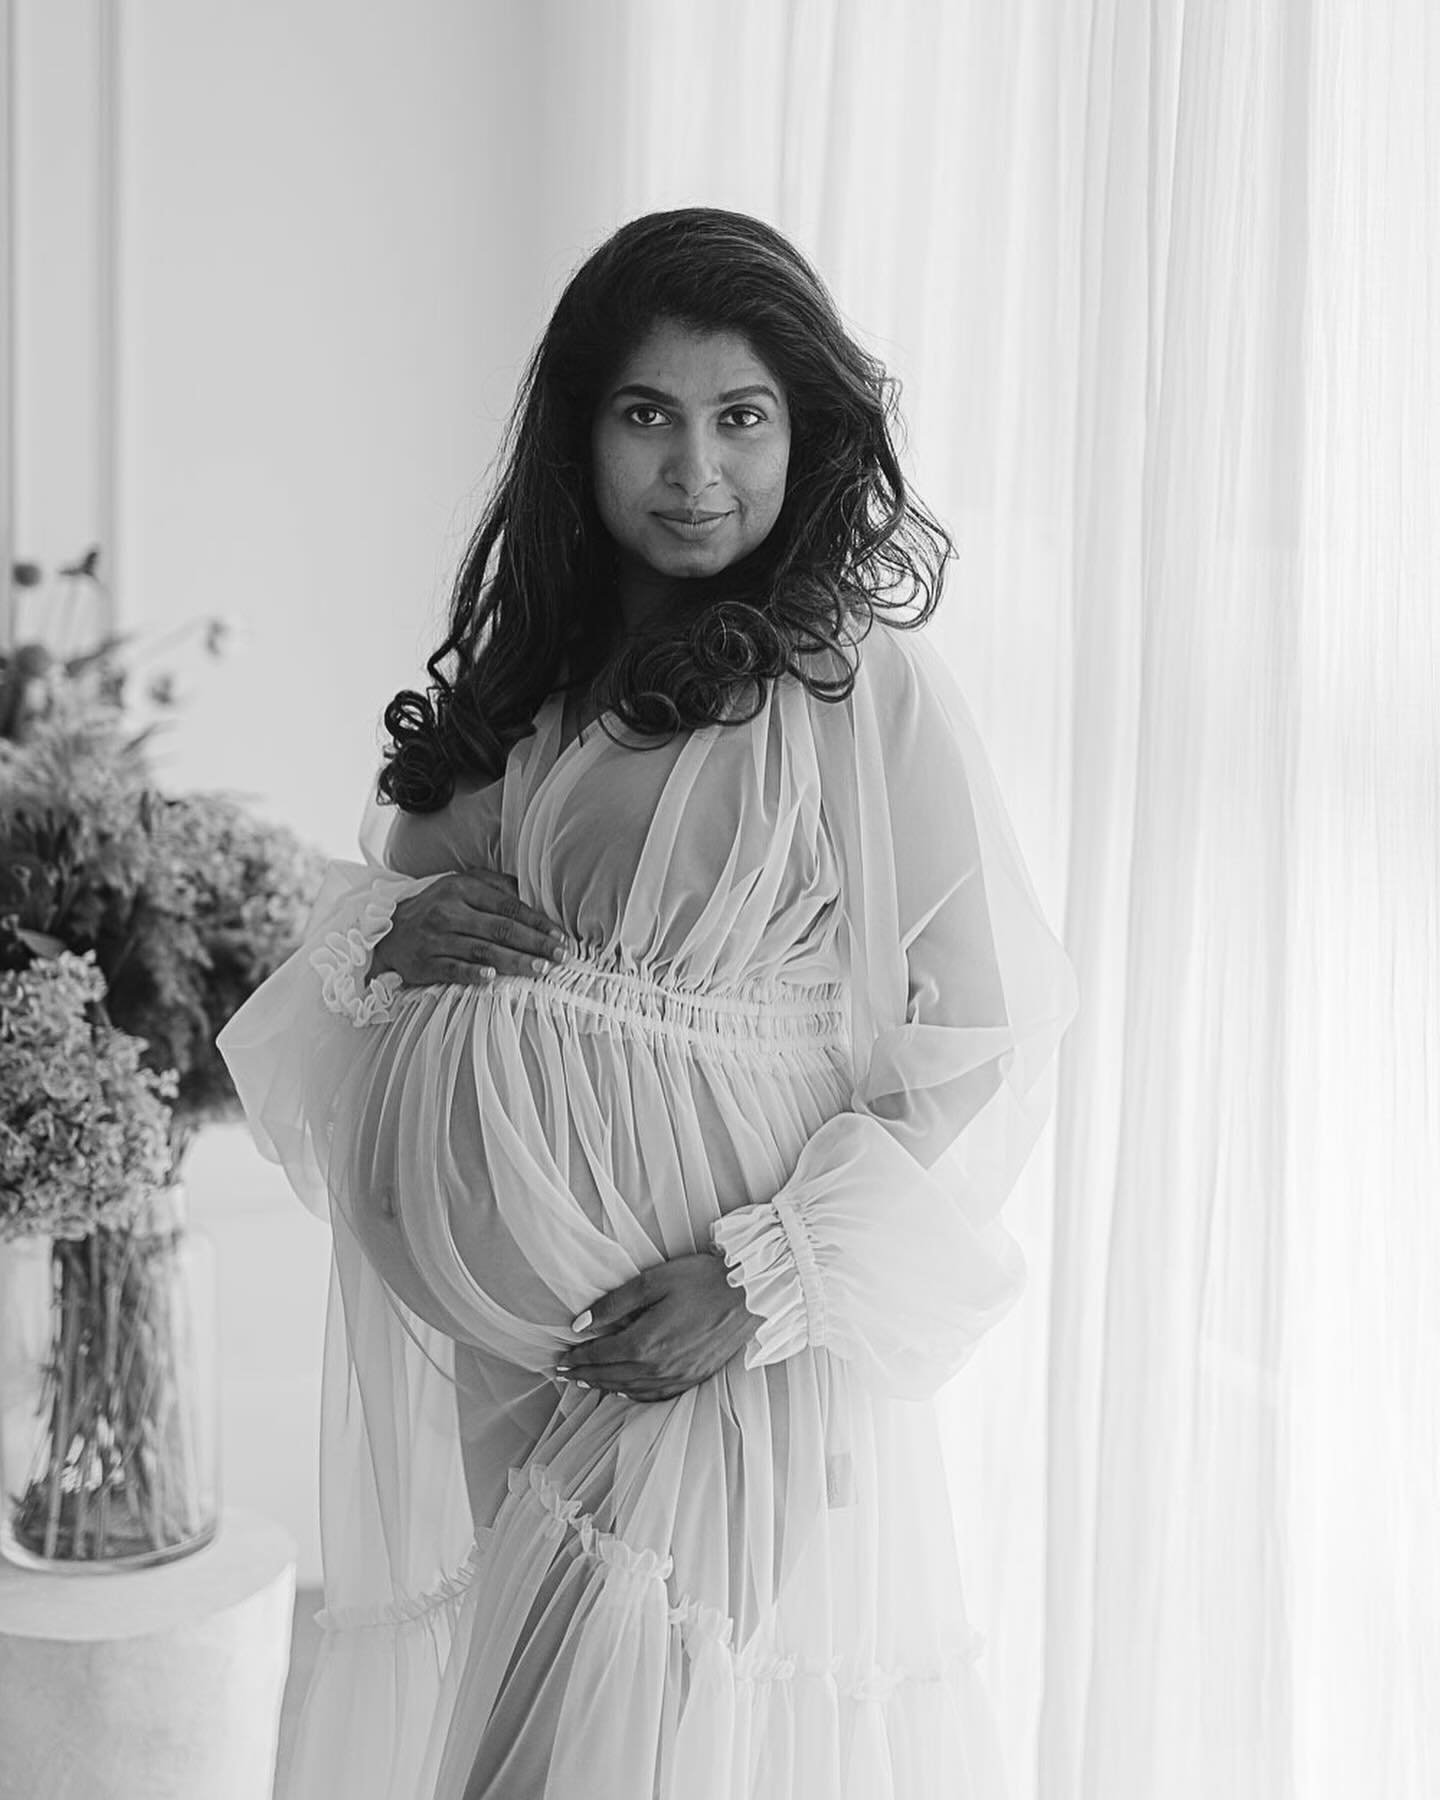 Goddess unleashed ✨

Working on this gorgeous proof gallery &hearts;︎

Melbourne Maternity &amp; Newborn Photographer / Family-centred sessions / Mothers &amp; Baby Closet / South Morang Studio
www.thefitzroys.com
@thefitzroys

#ignitedmotherhood #me